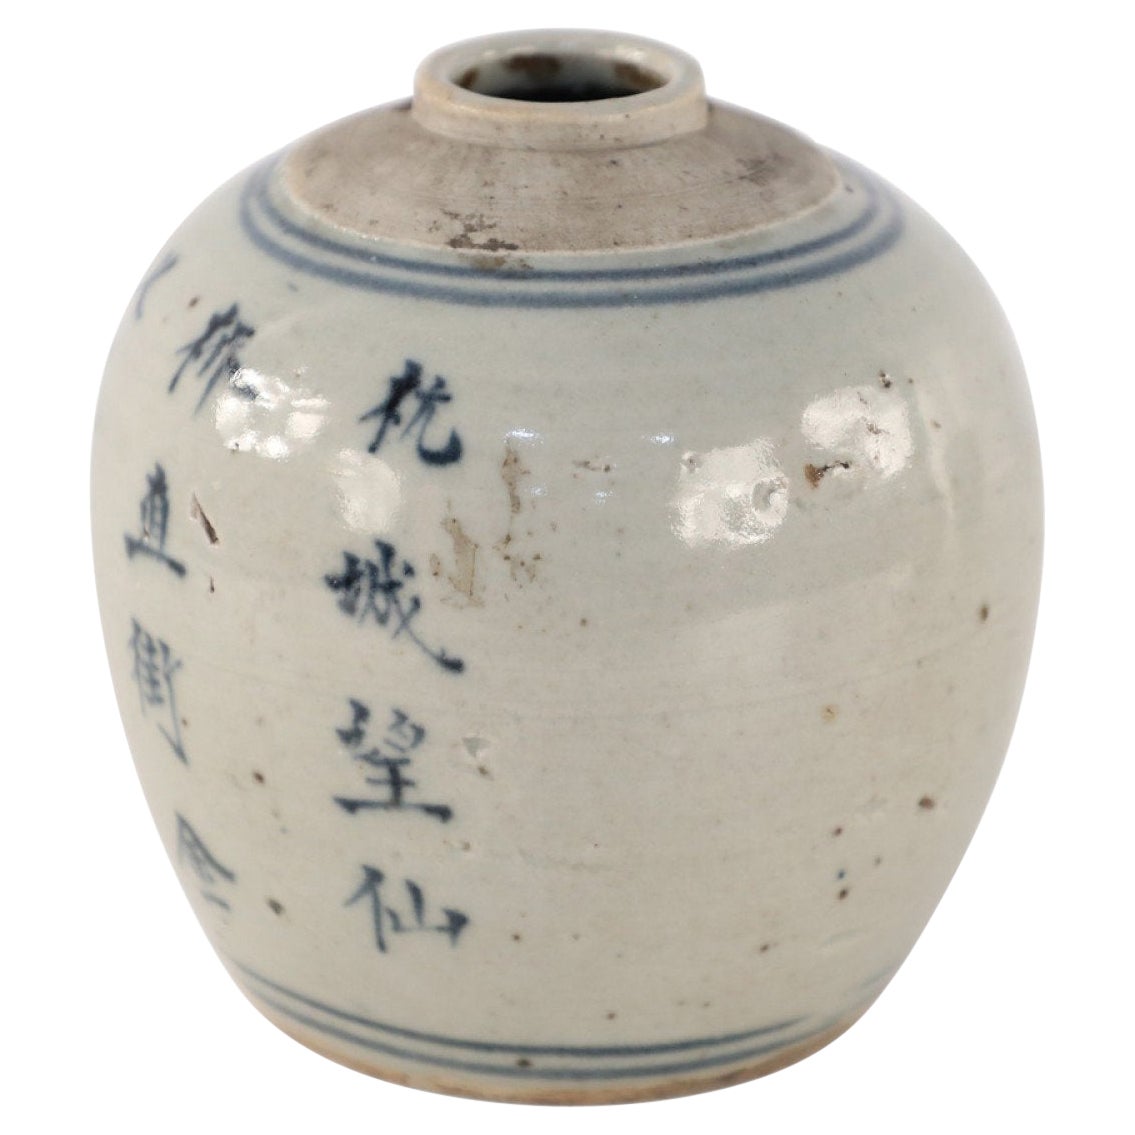 Antique Chinese Earthenware Jar with Blue Characters